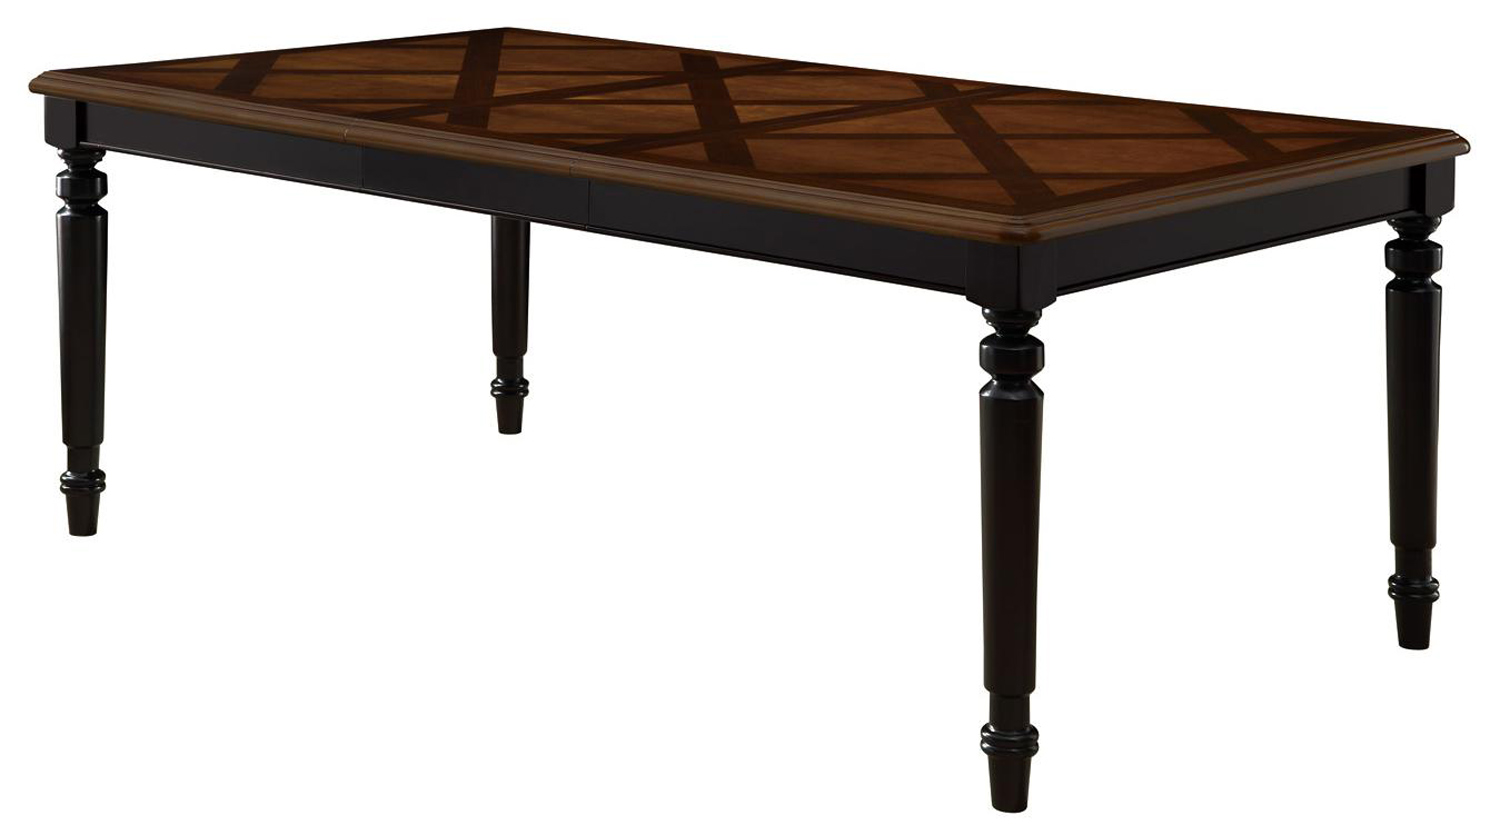 Coaster Conner Dining Table - Tobacco